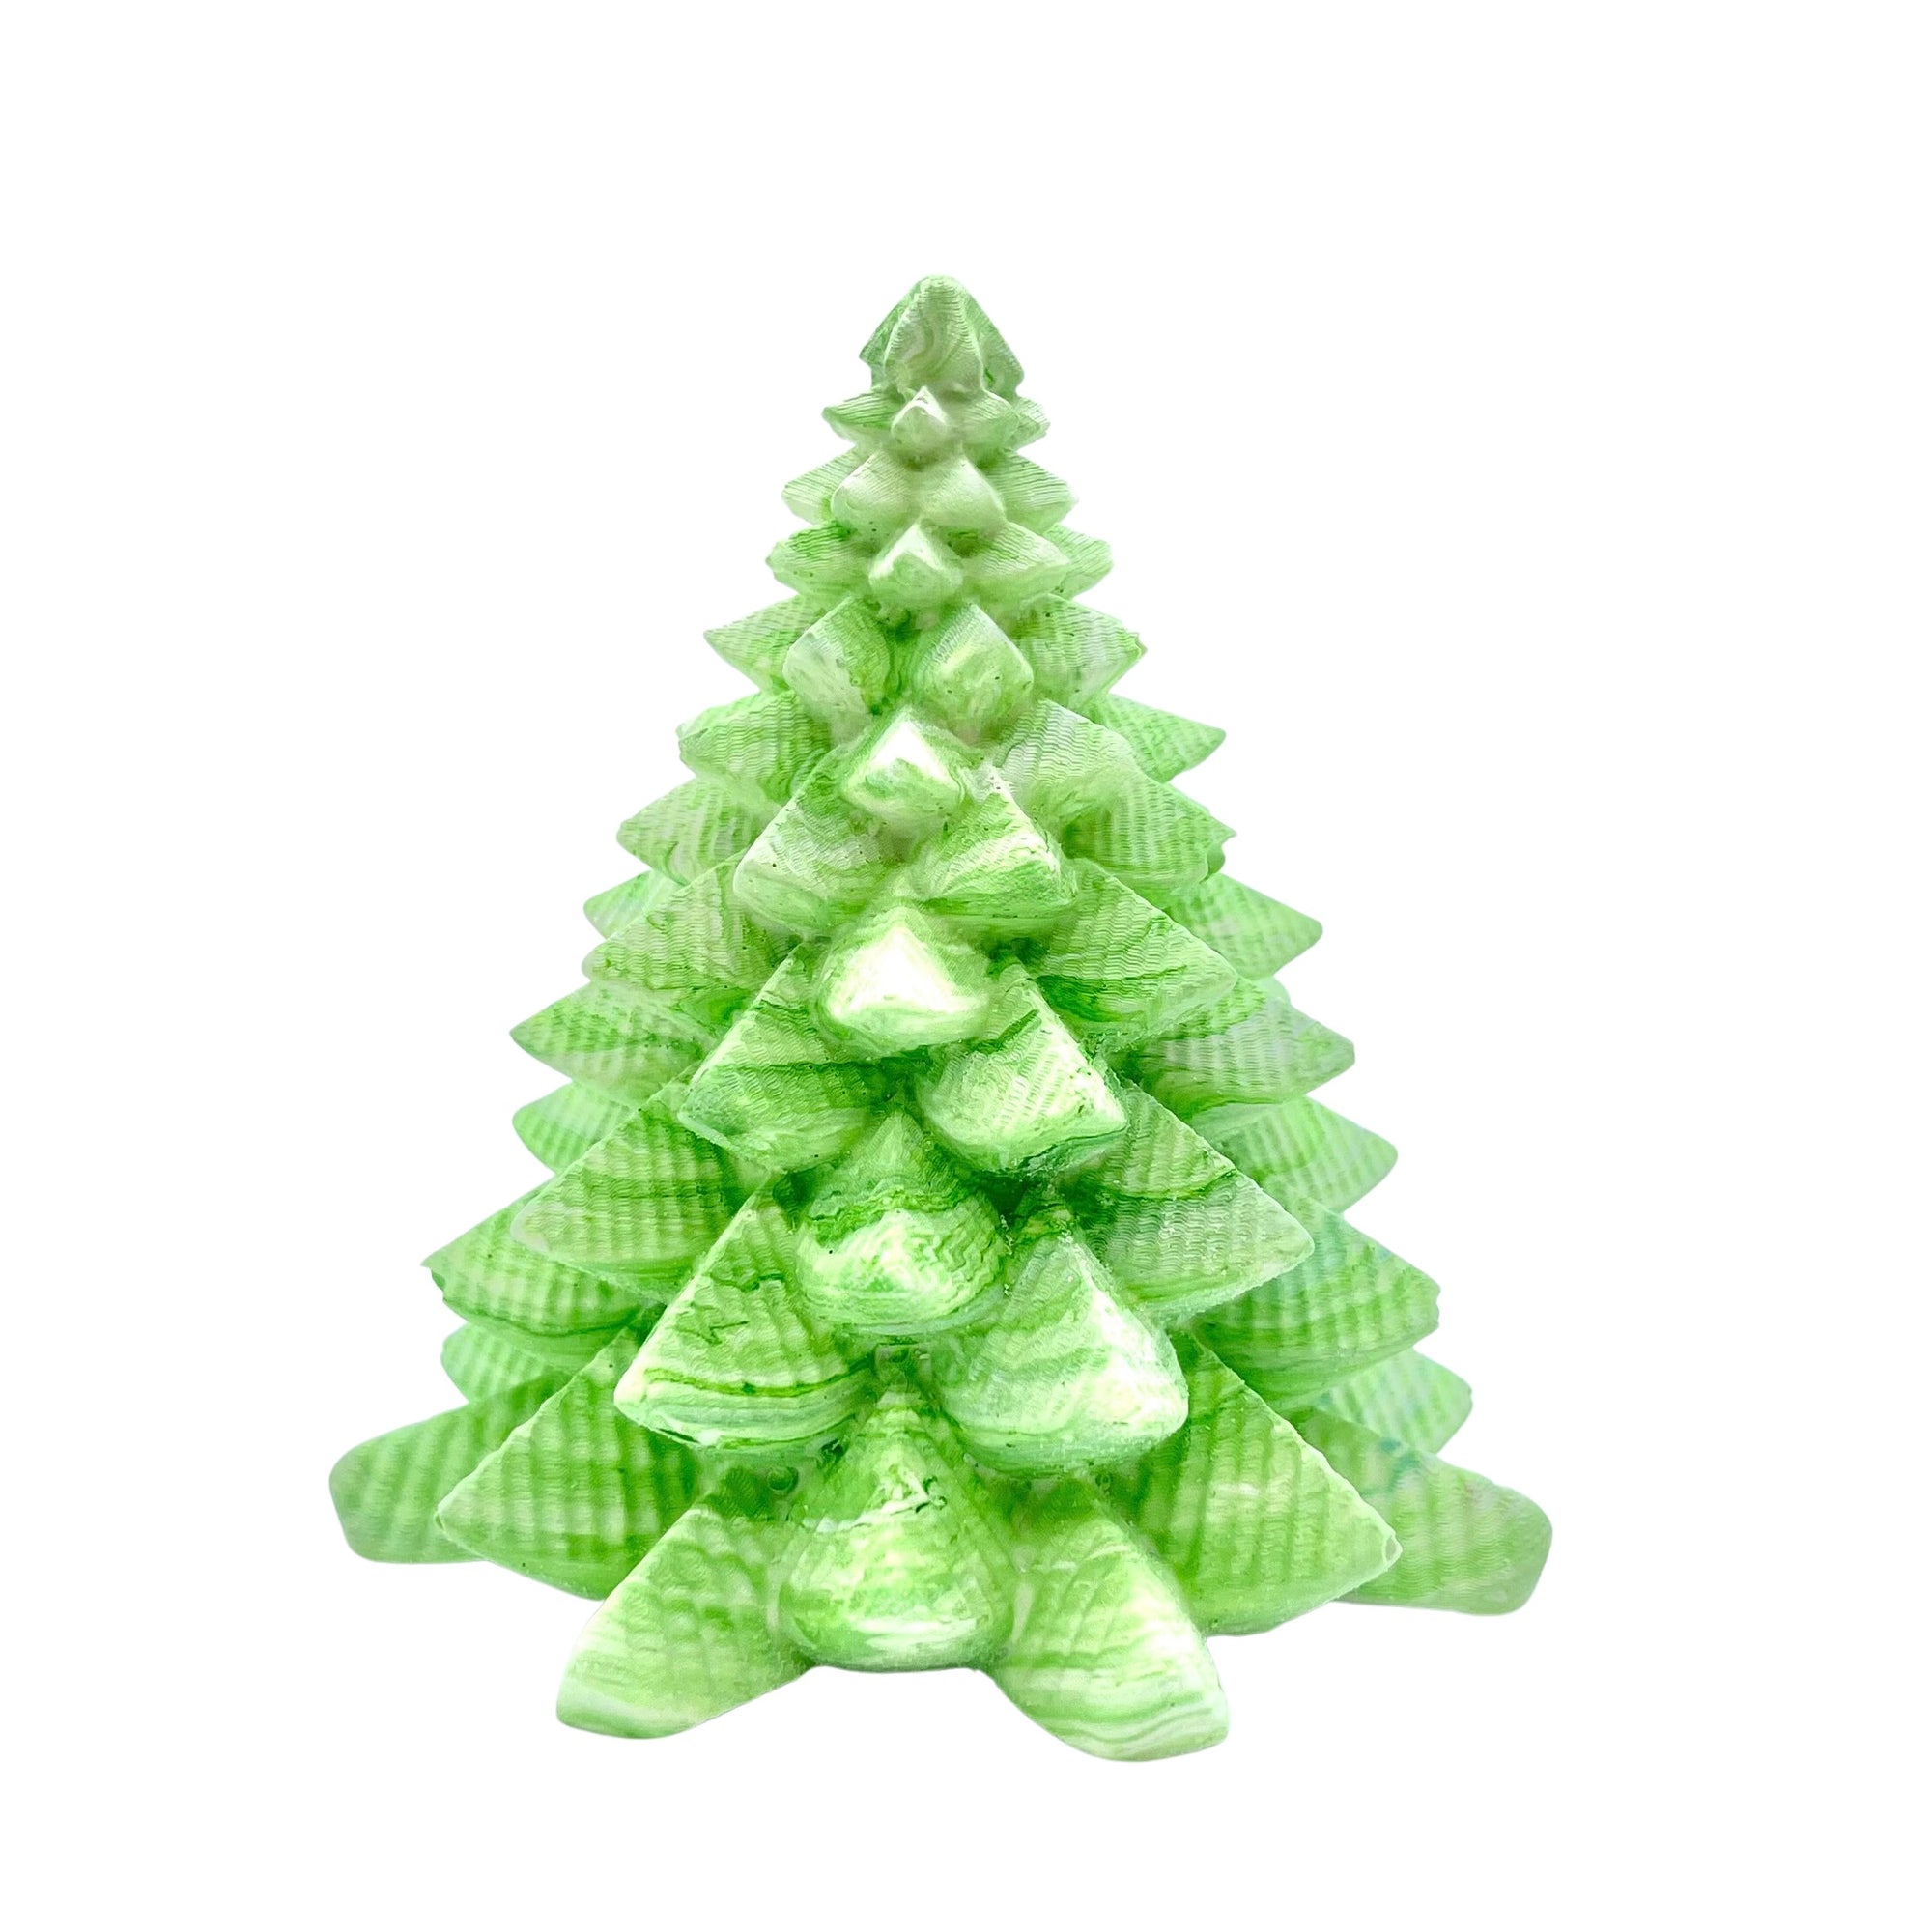 A small Jesmonite Christmas tree measuring 8.5cm tall and 7.5cm wide marbled with green pigment.